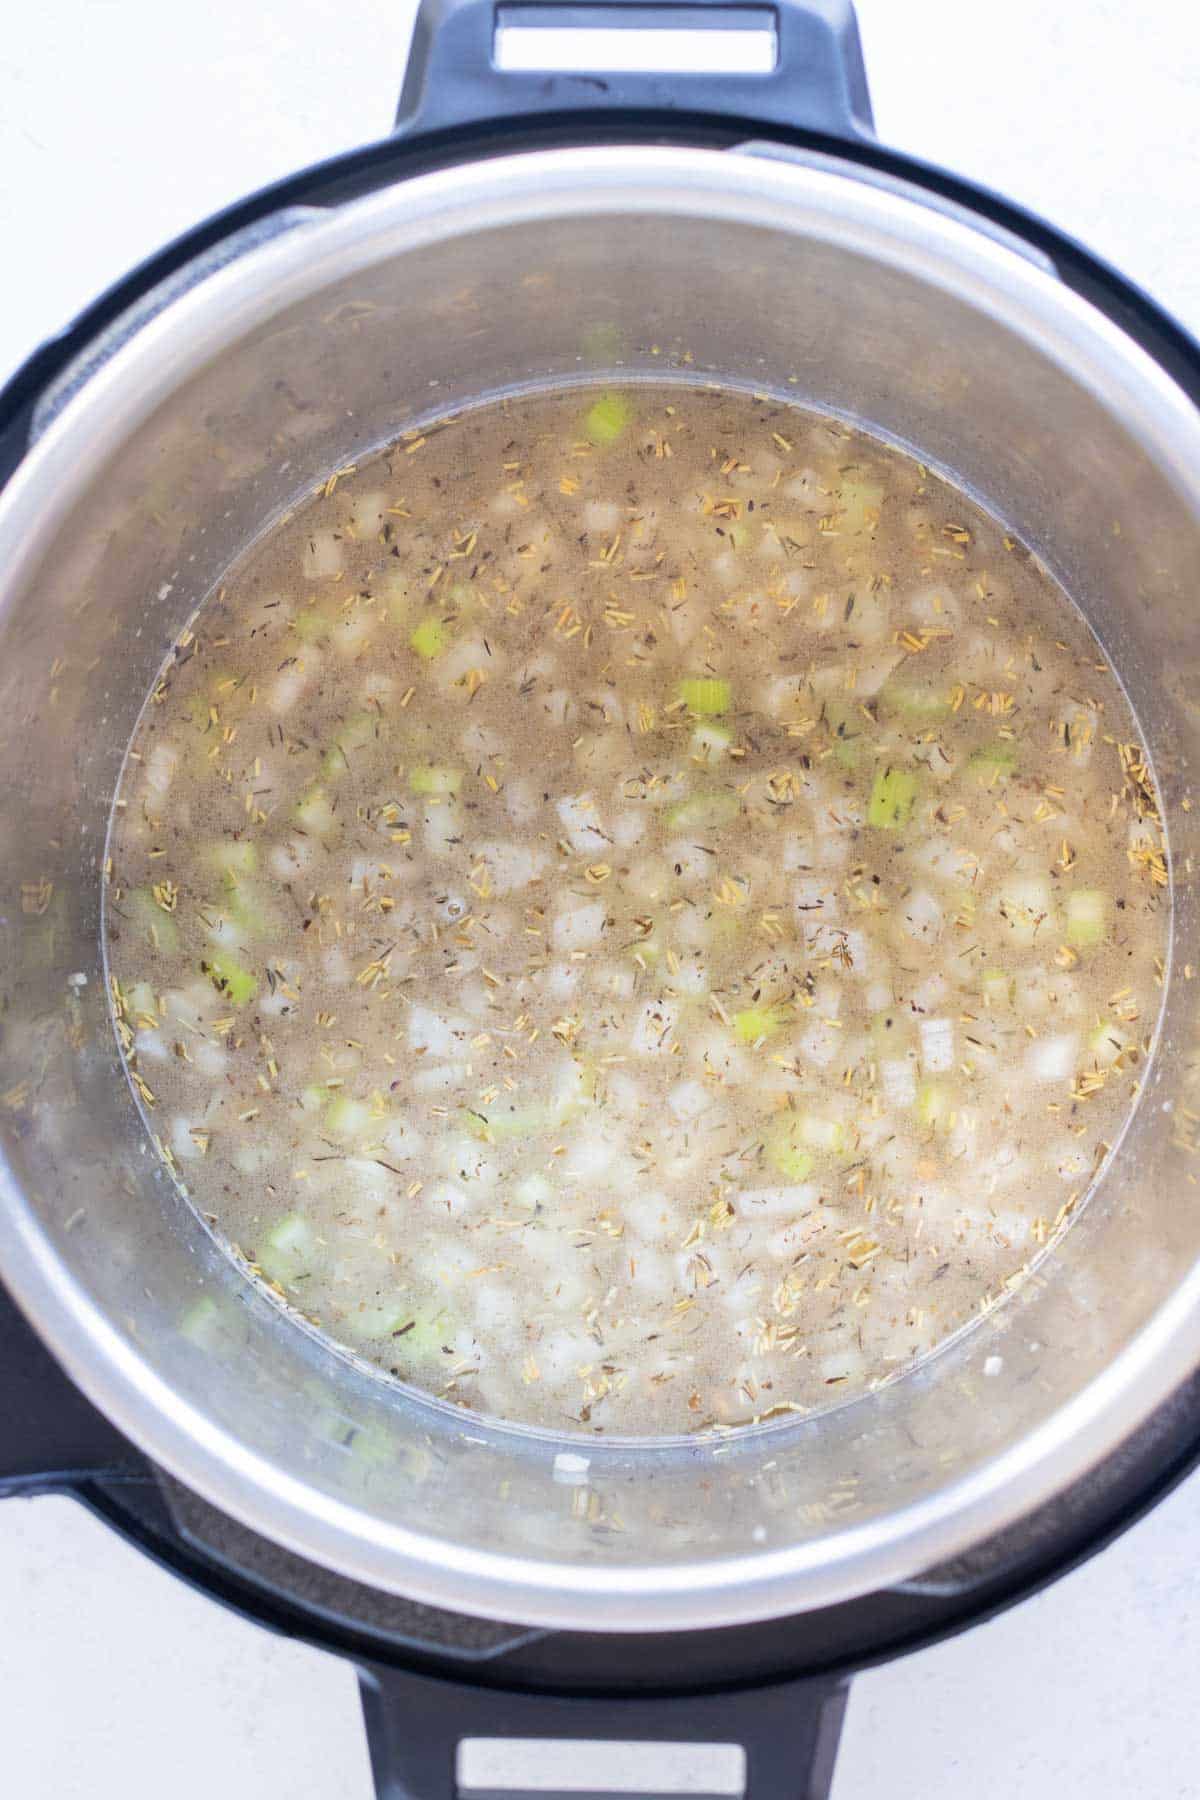 Onions and celery is cooked to make the base of the soup.